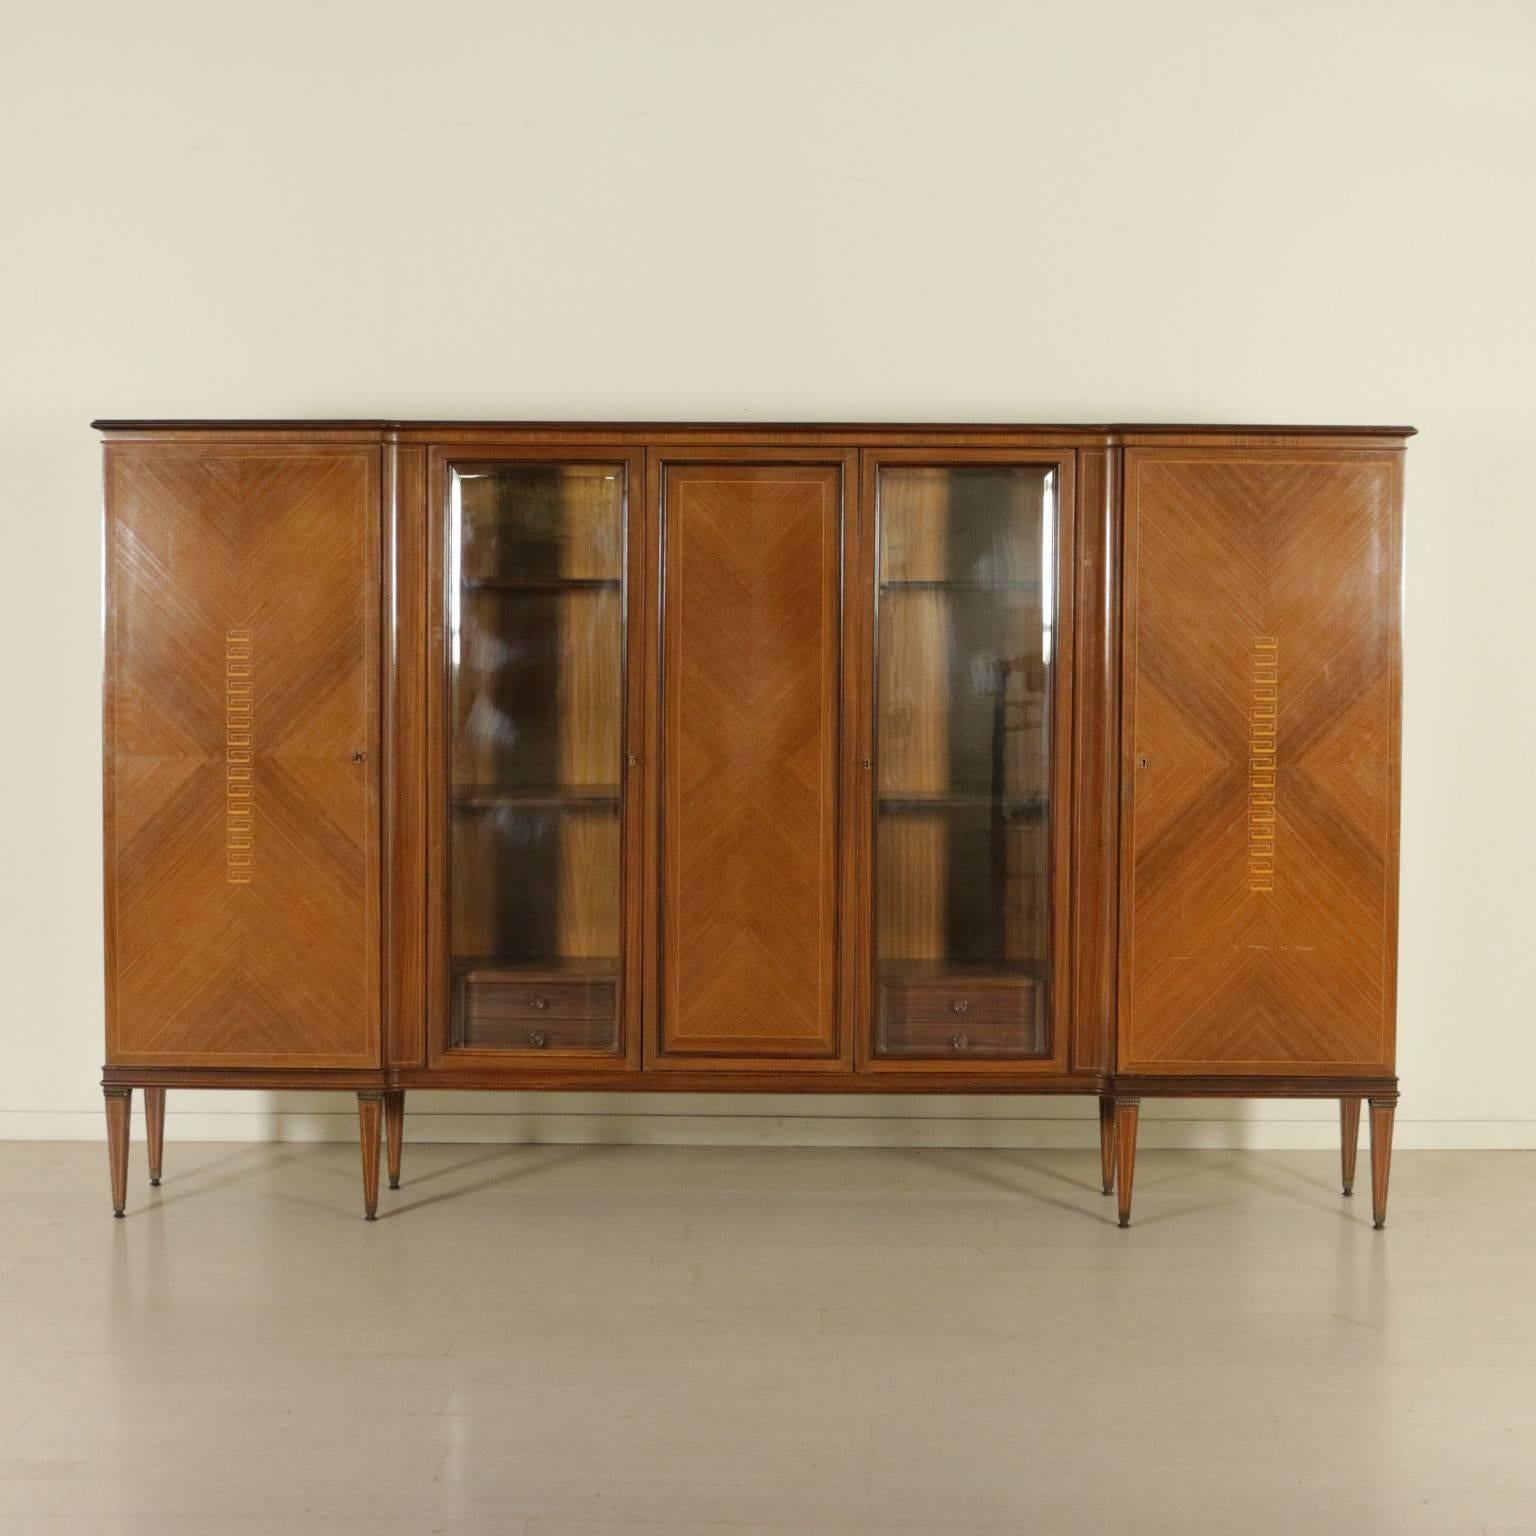 A wardrobe, rosewood veneer with inlaid threads, brass ferrules. Manufactured in Italy, 1950s.